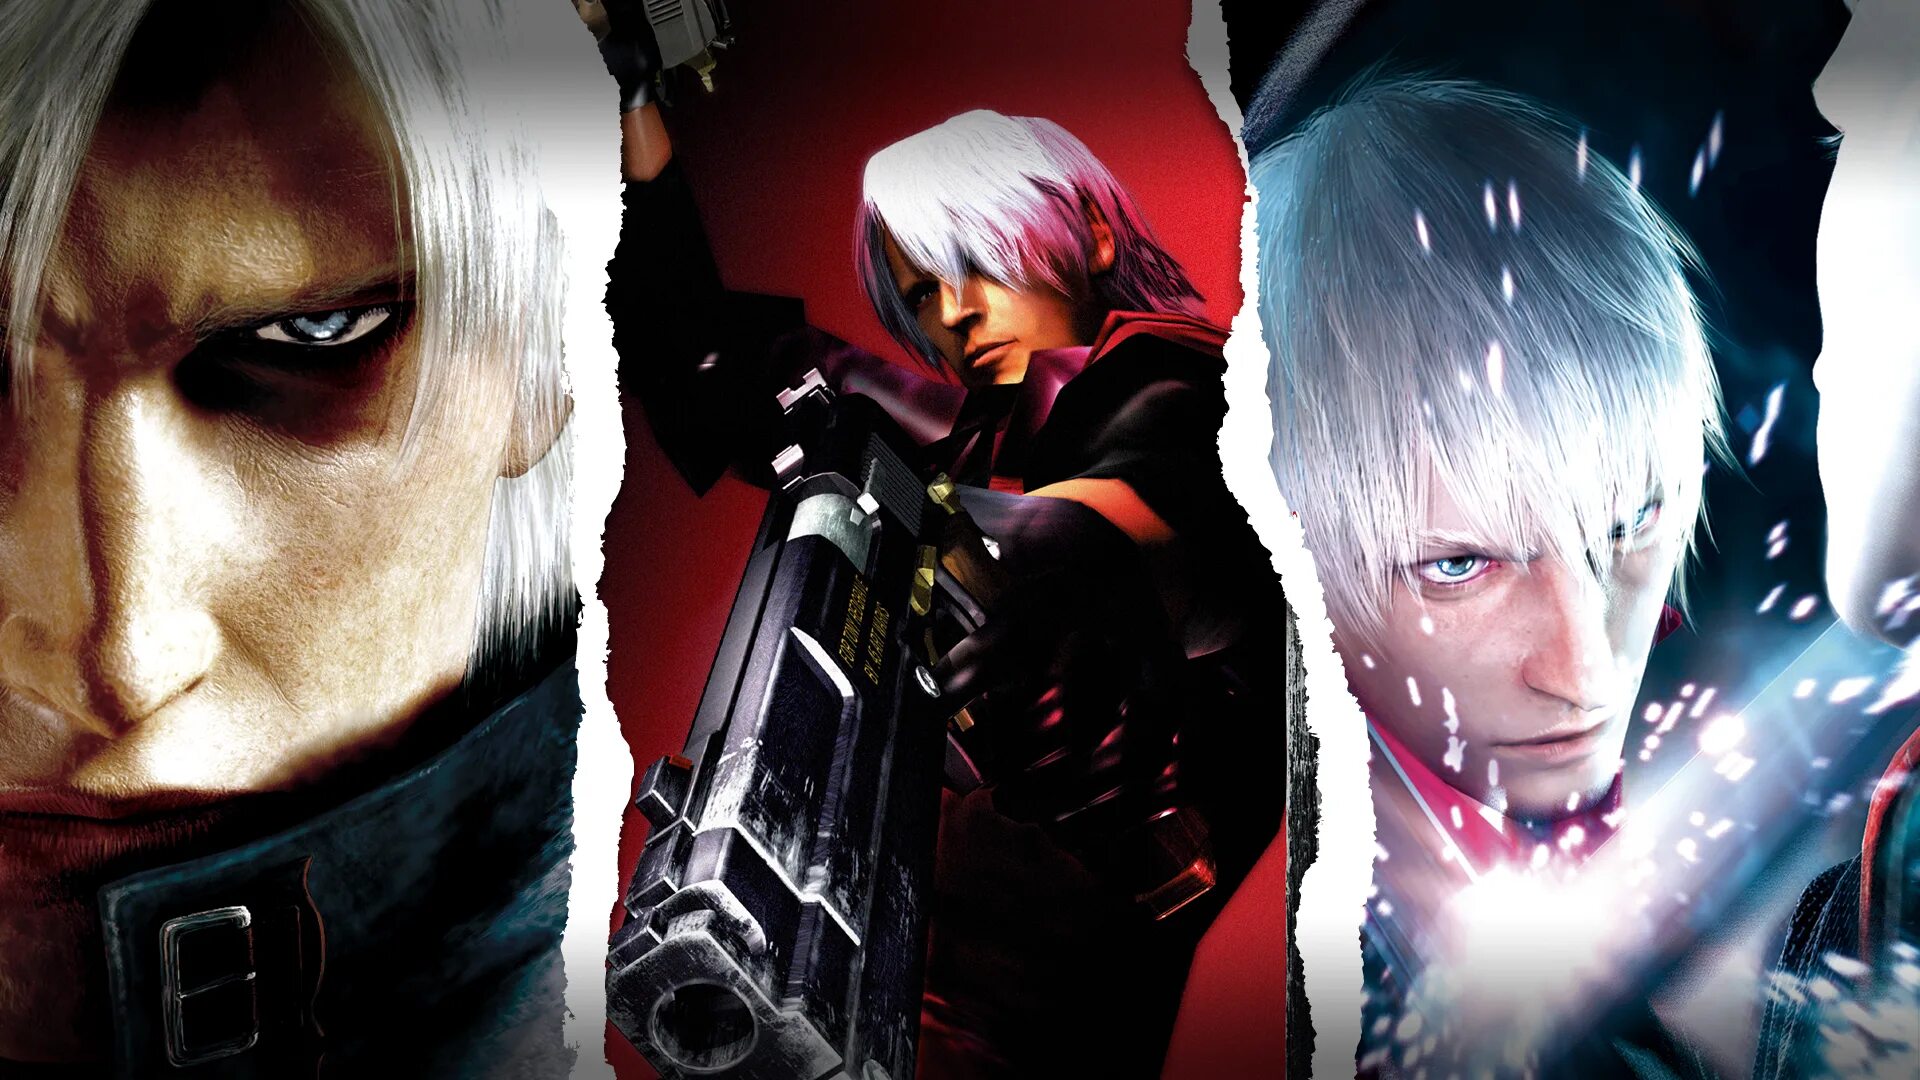 Devil may cry новелла. Devil May Cry 1. Devil May Cry 5. Devil May Cry 1-3. Данте Devil May Cry 2.